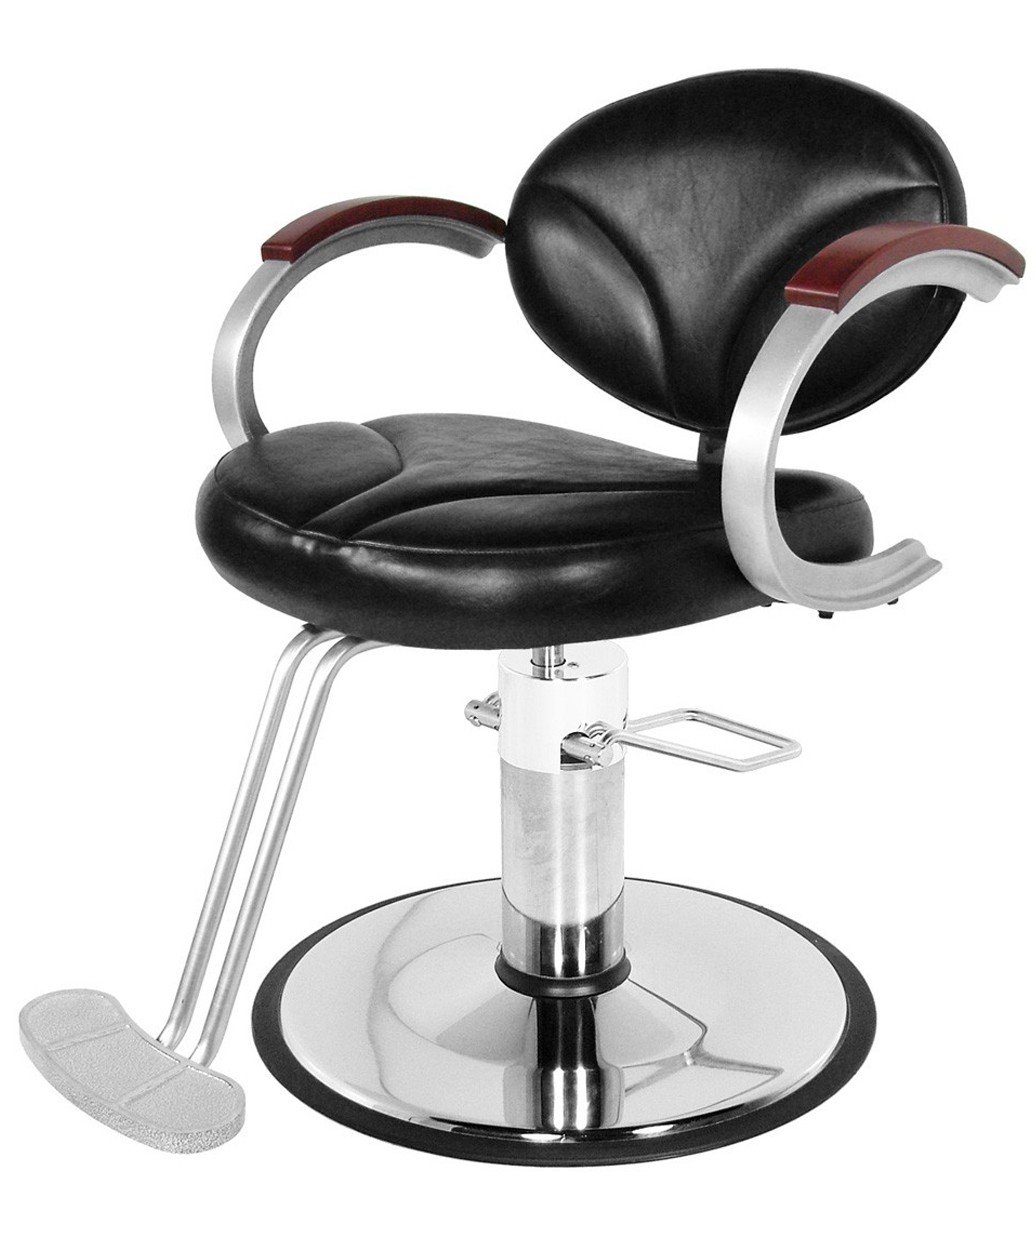 Collins 9100 Silhouette Styling Chair